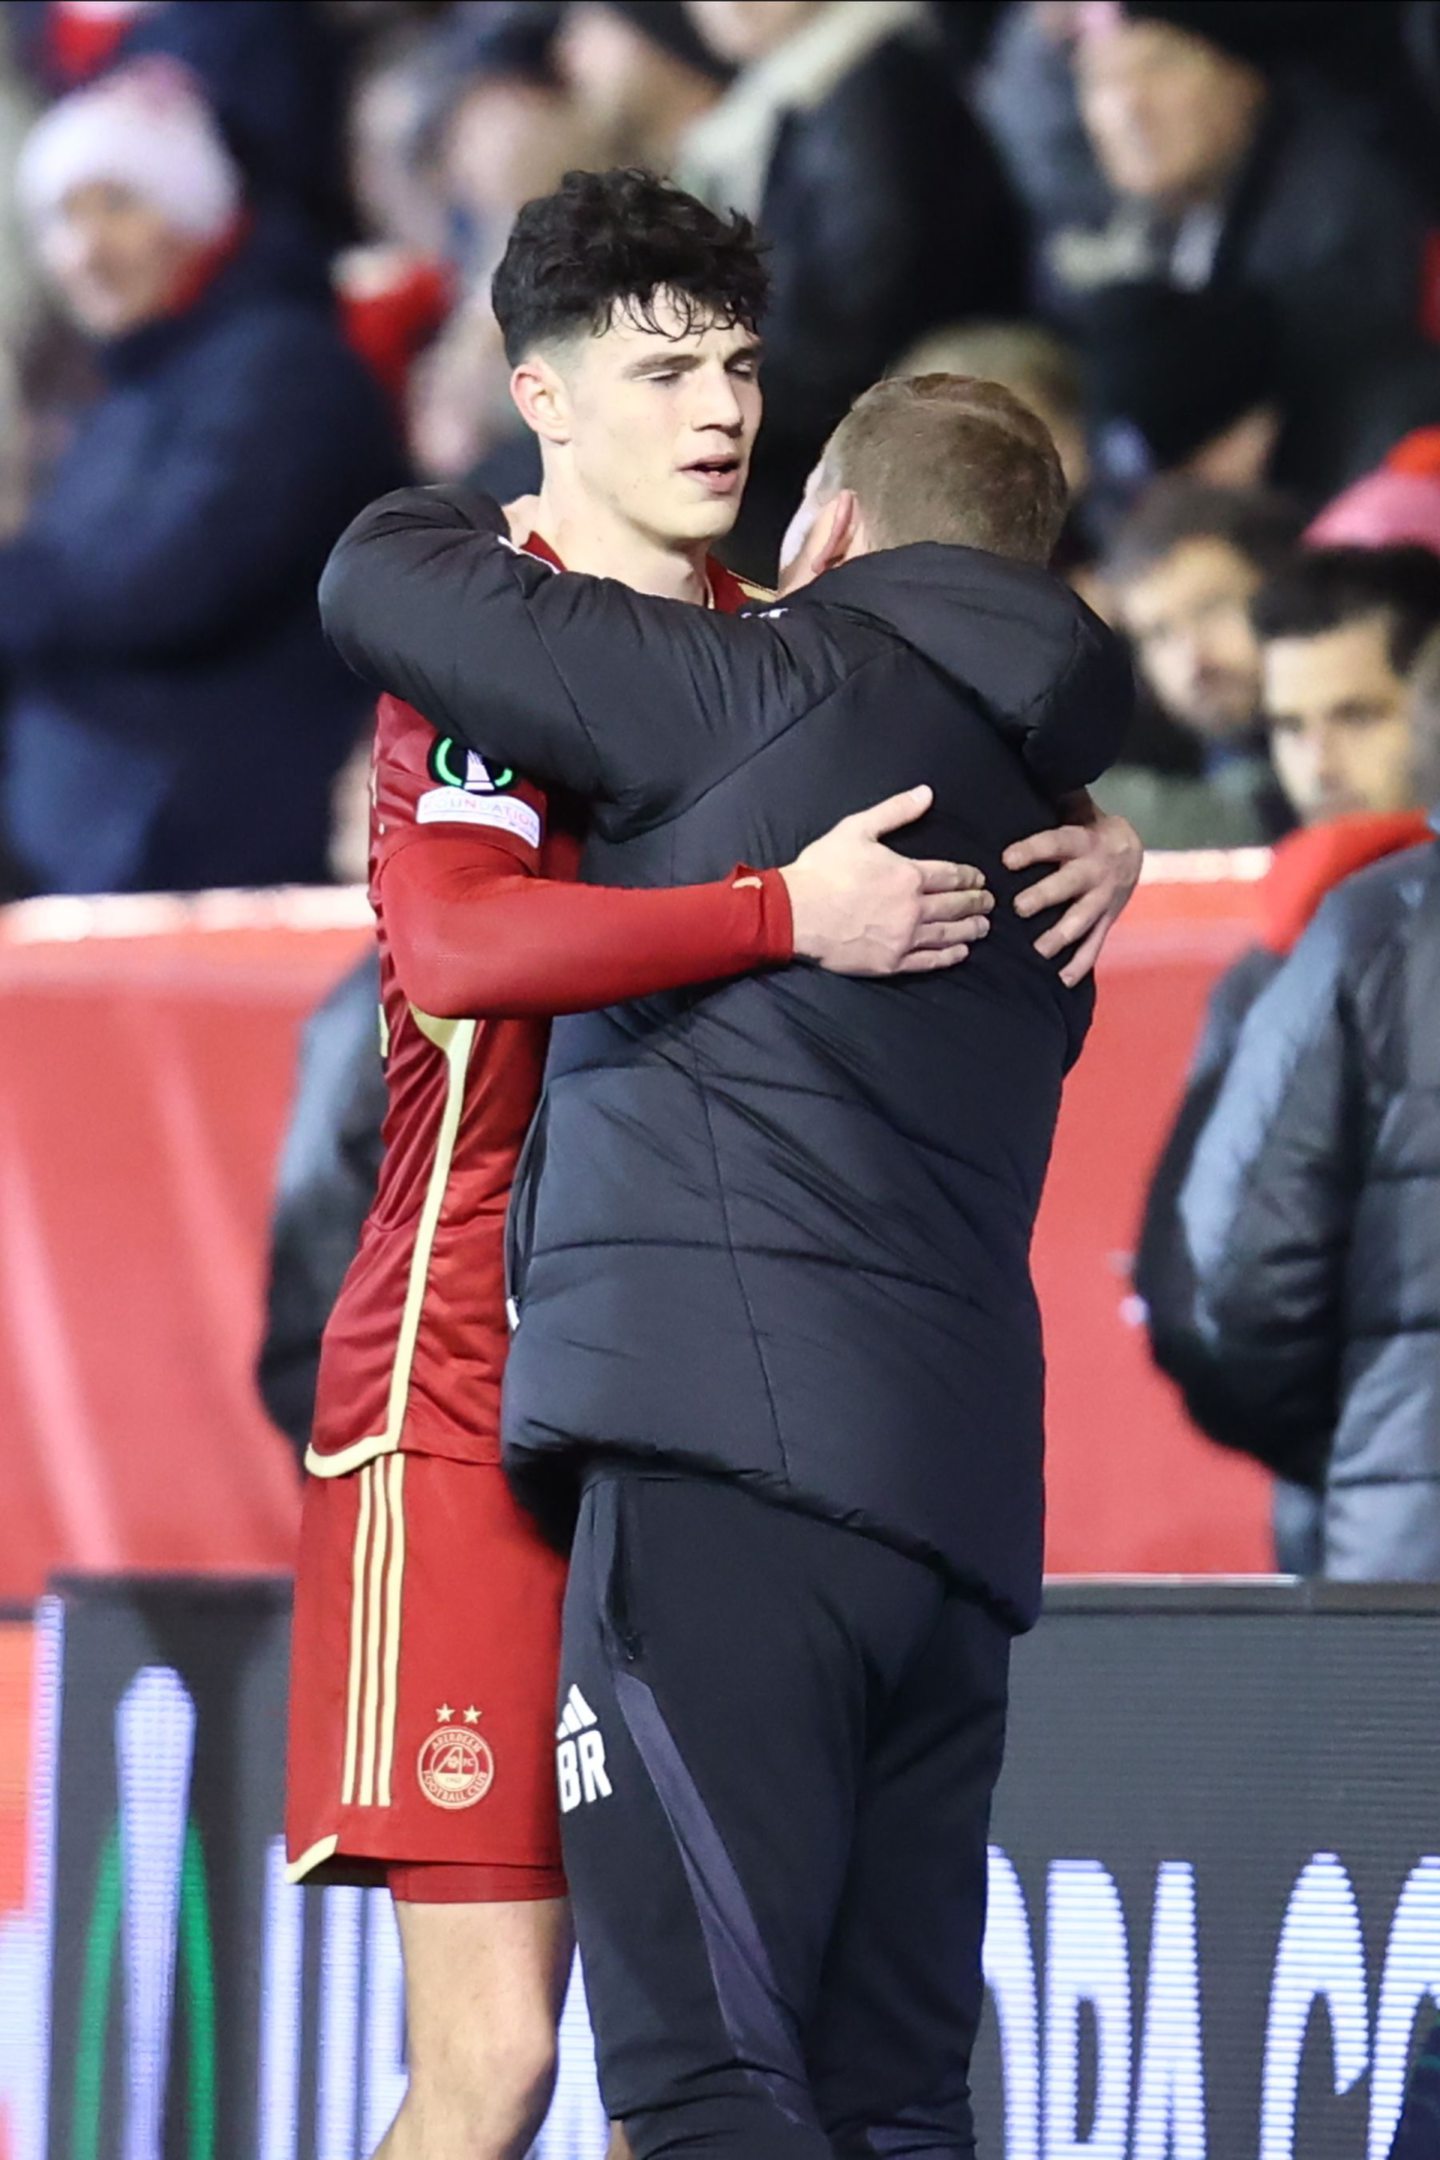 Aberdeen defender Jack Milne is embraced by boss Barry Robson after the Eintracht Frankfurt game at Pittodrie Stadium. Image: Shutterstock